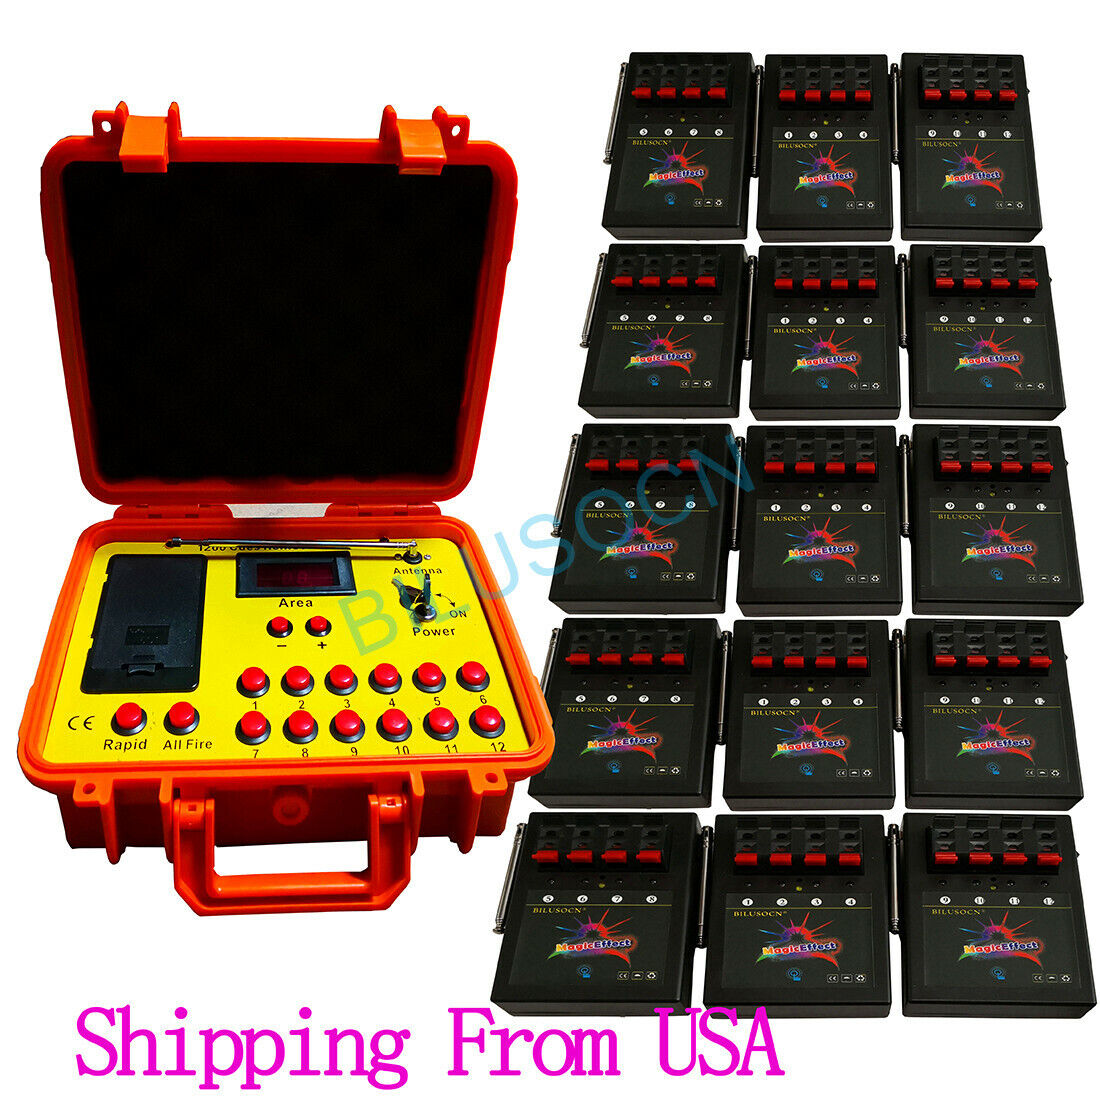 Ship From USA 500M 60 cues fireworks firing system 1200cues wireless control 